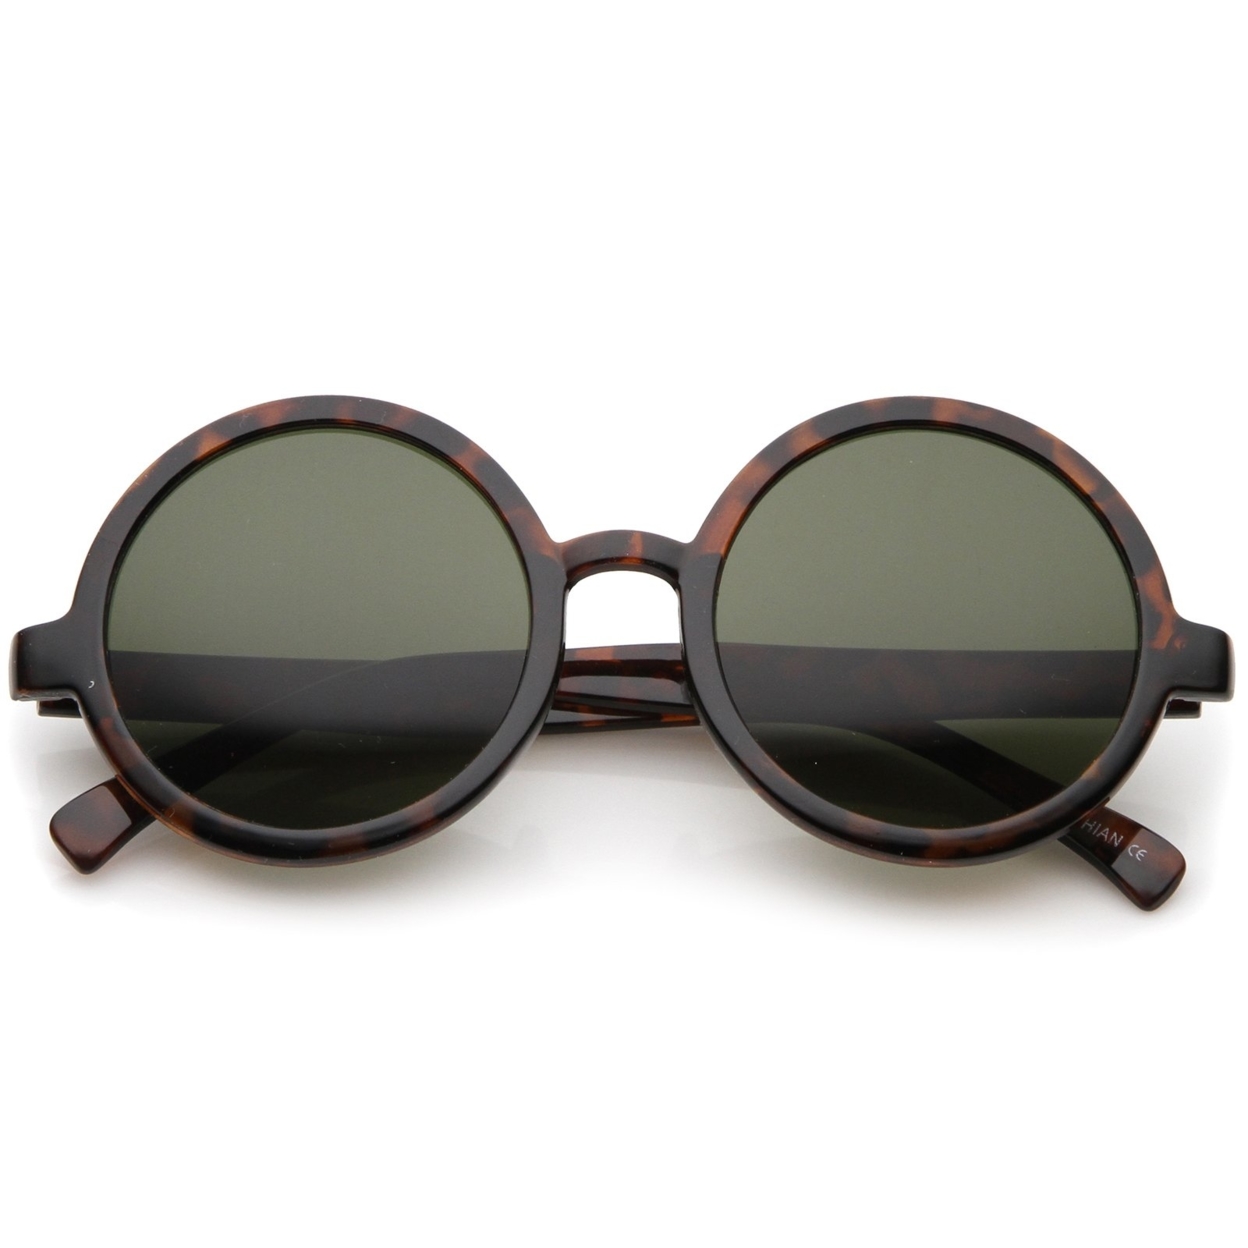 Classic Retro Horn Rimmed Neutral-Colored Lens Round Sunglasses 52mm - Tortoise / Green